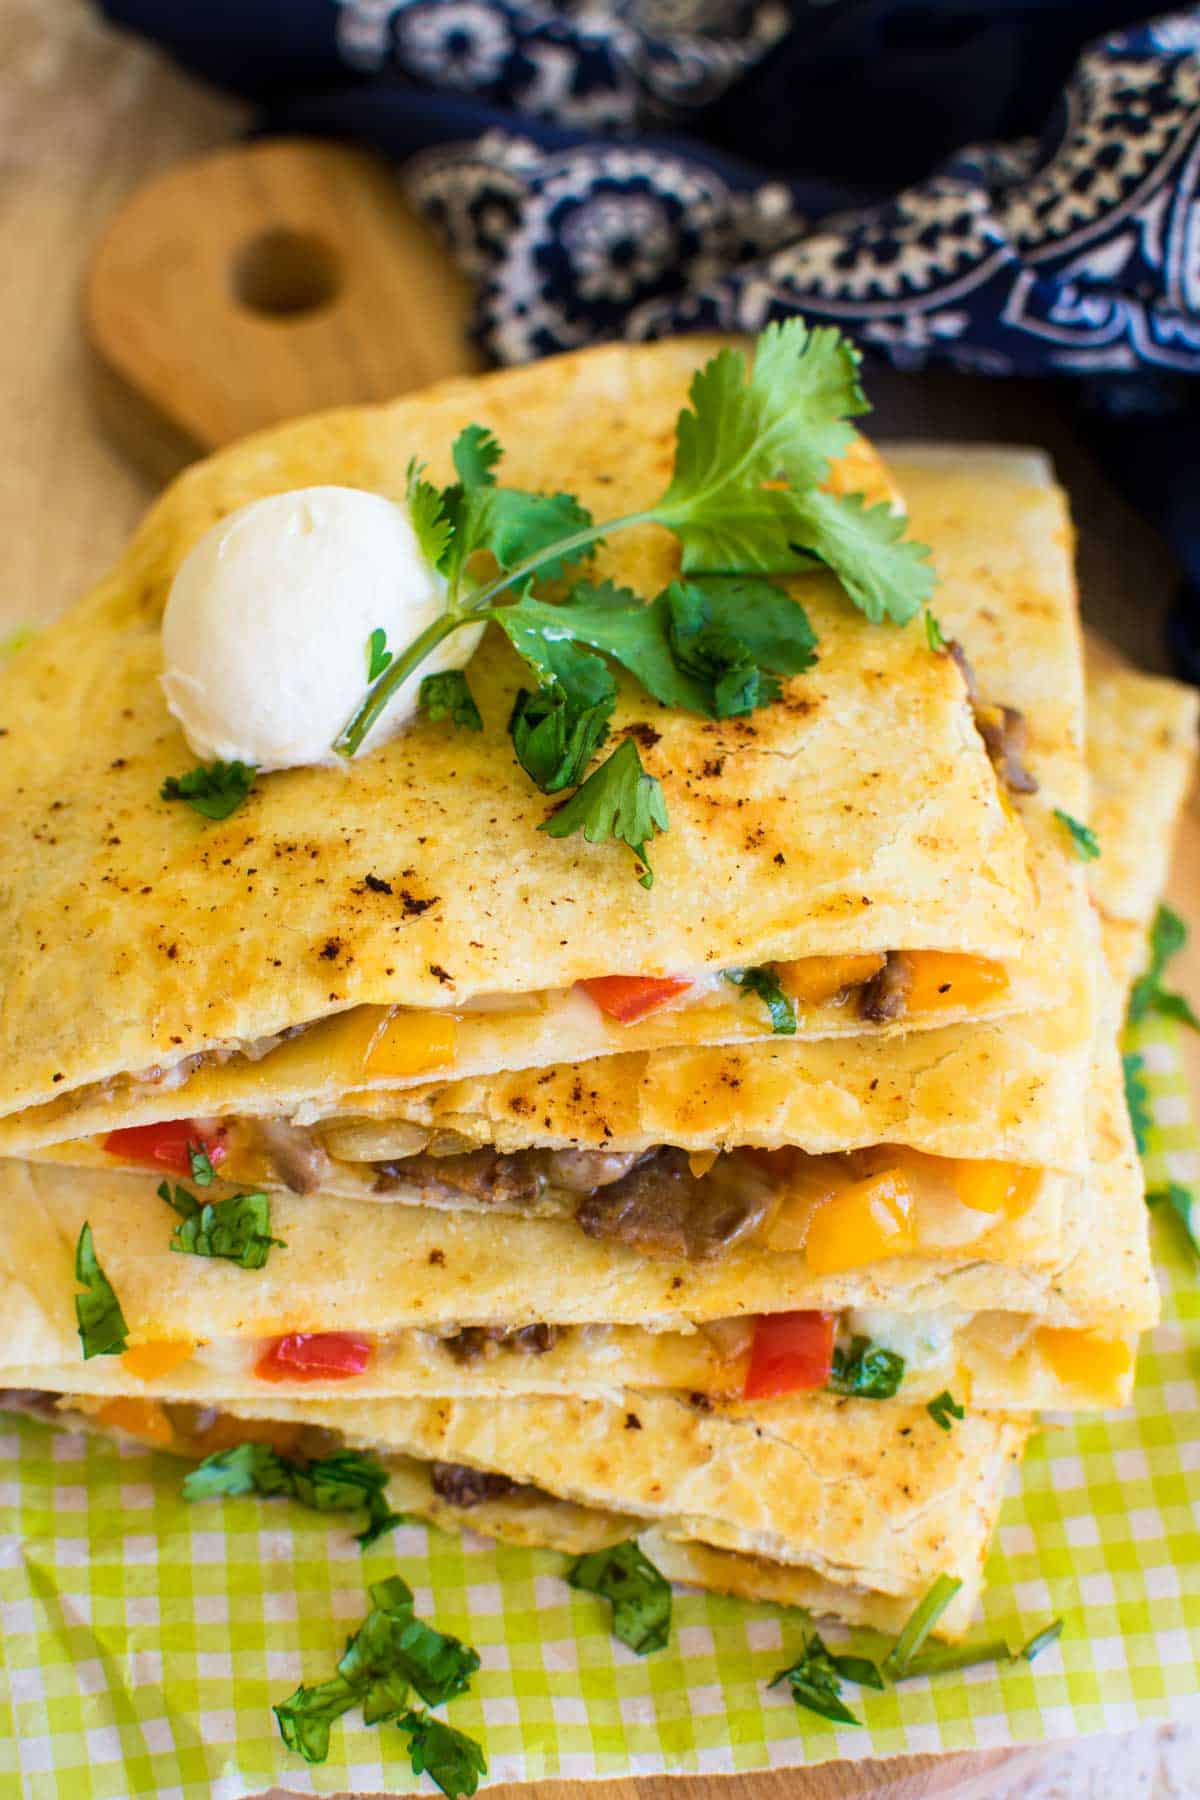 Wedges of fried cheese and steak quesadilla on a plate with sour cream and cilantro.